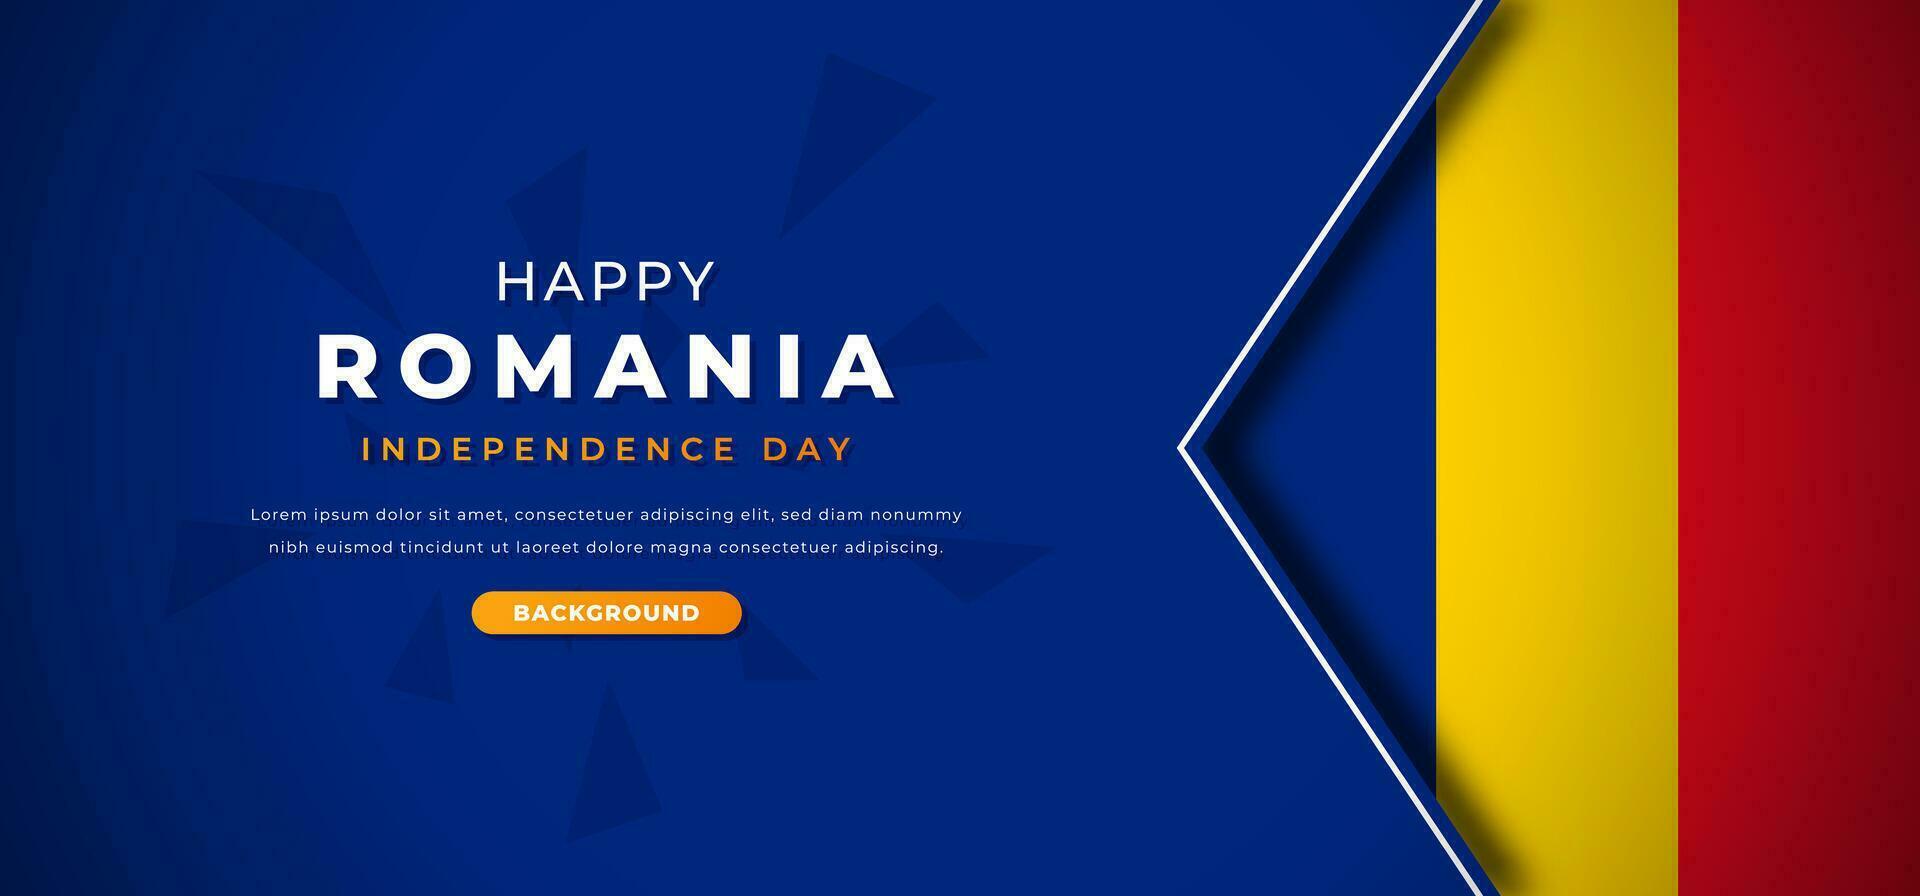 Happy Romania Independence Day Design Paper Cut Shapes Background Illustration for Poster, Banner, Advertising, Greeting Card vector